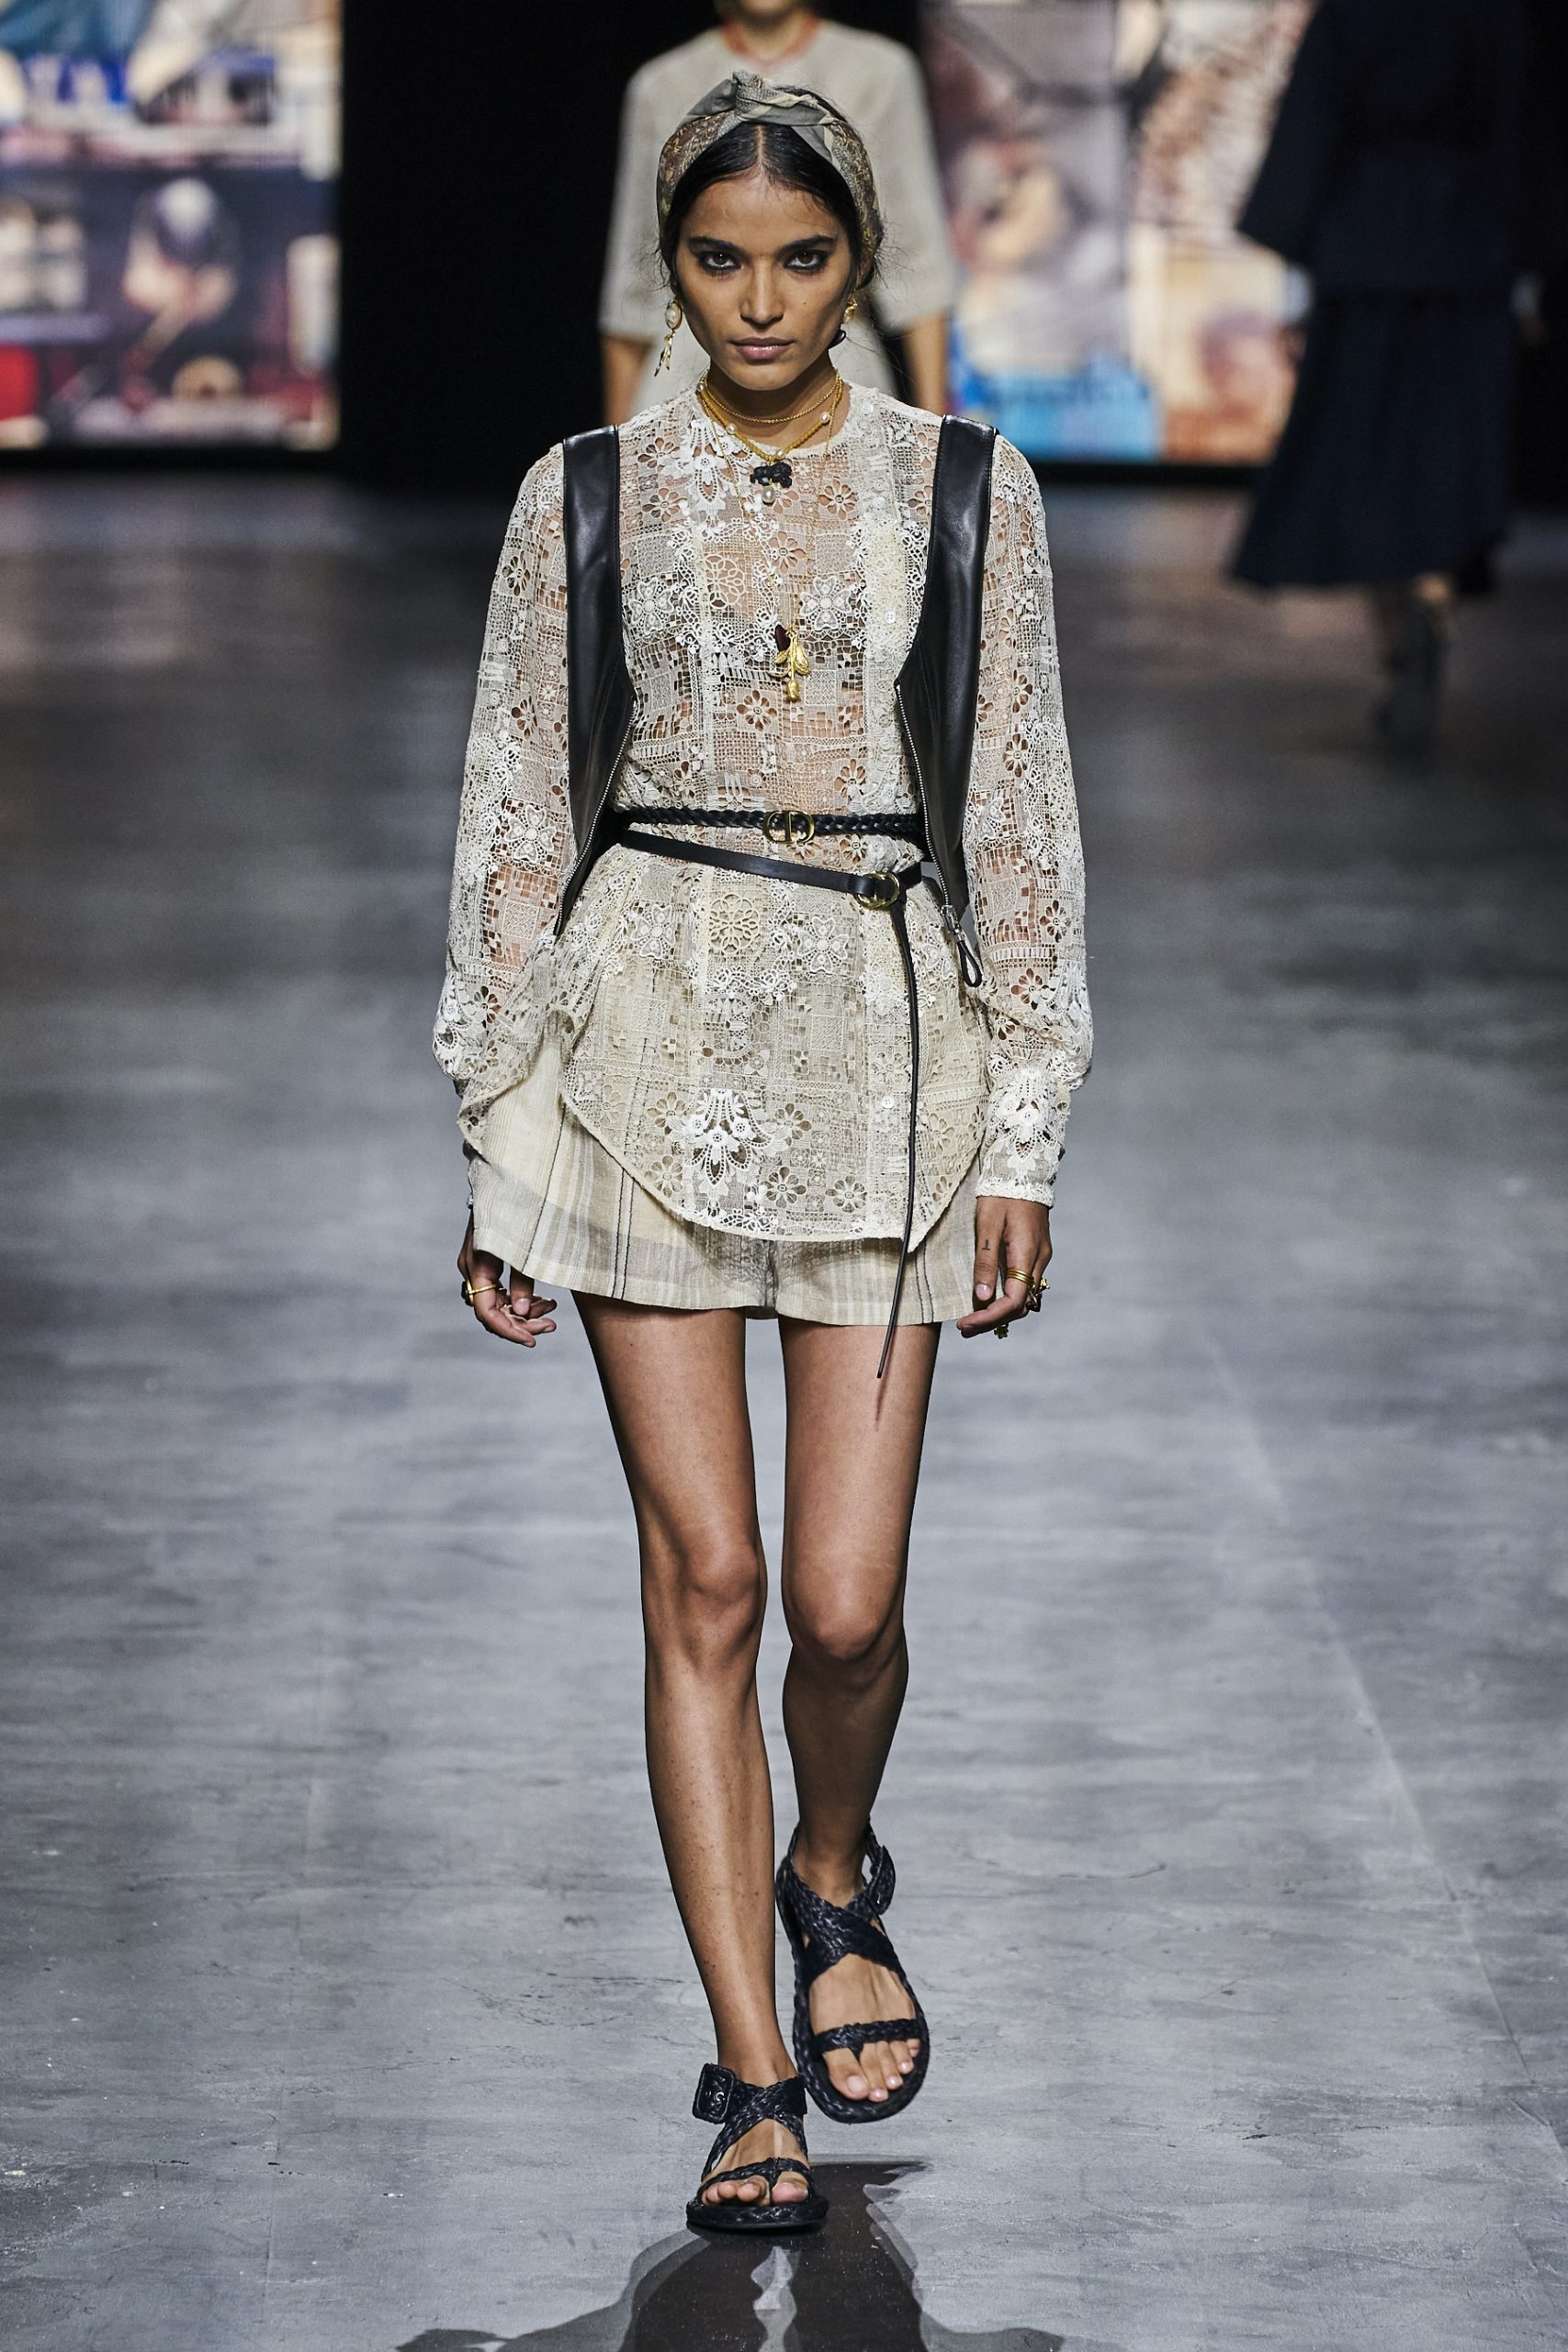 Top 15 Breakout Fashion Show Models of Spring 2021 | The Impression